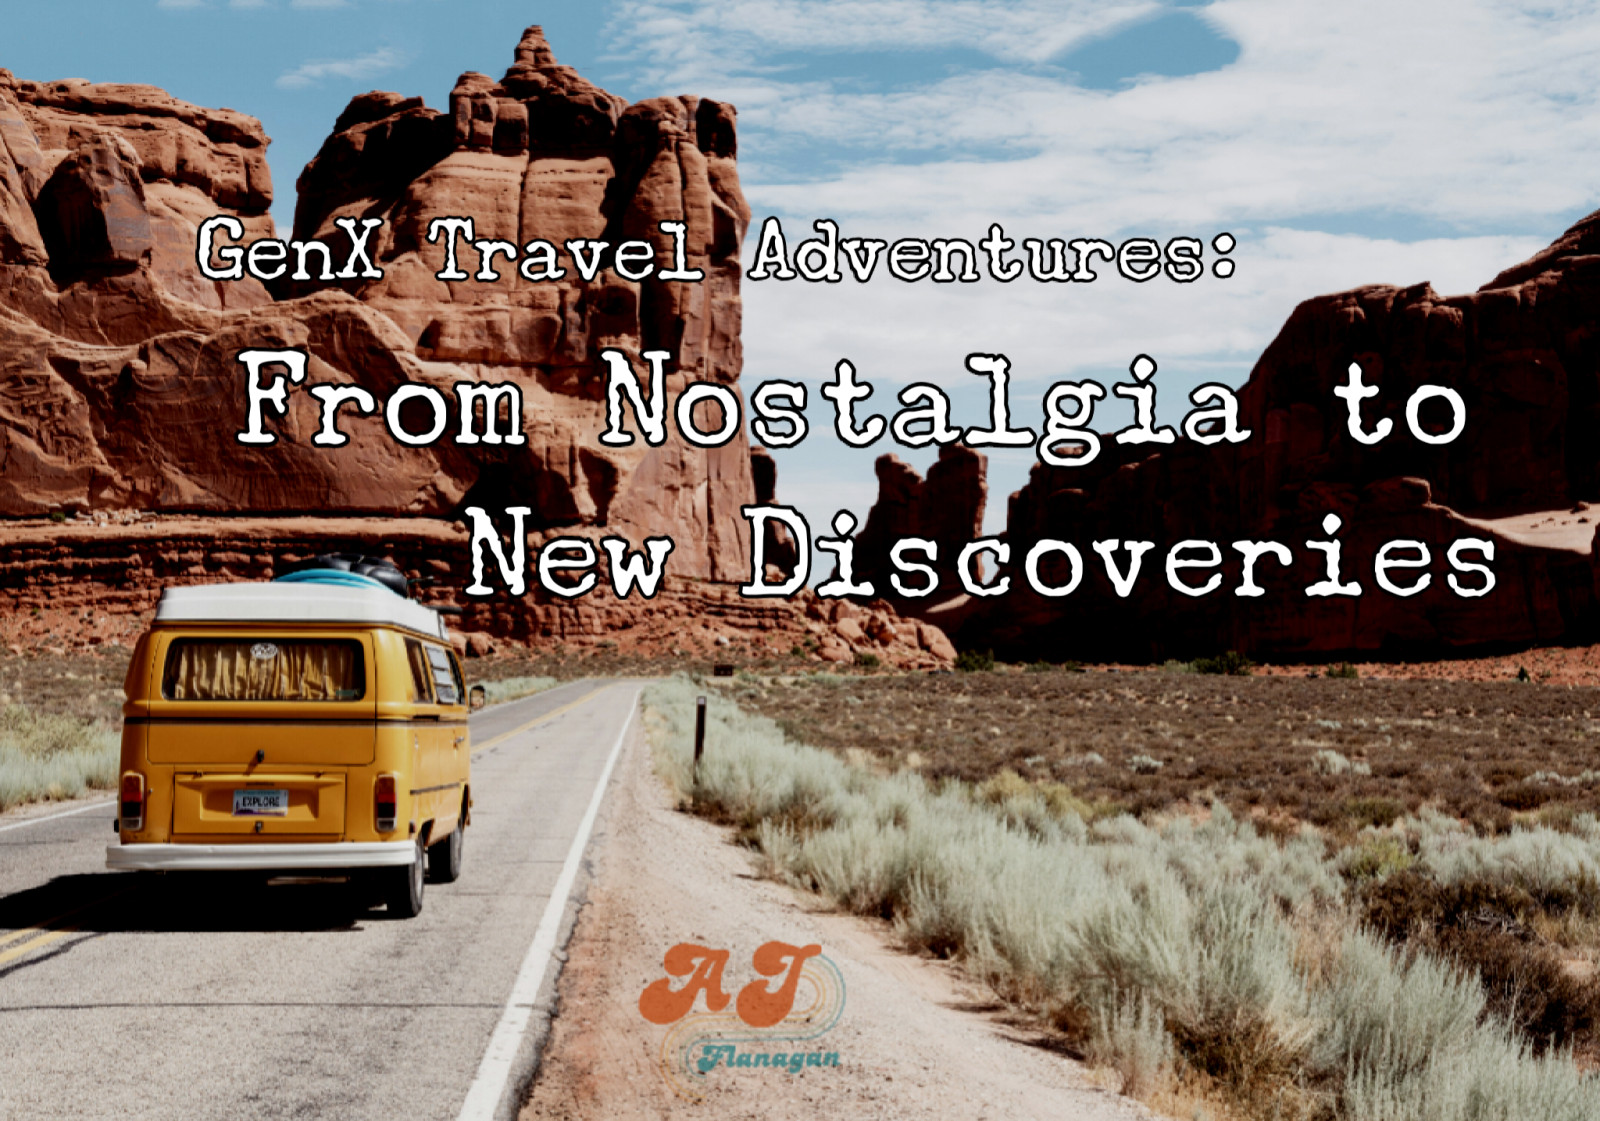 GenX Travel Adventures: From Nostalgia to New Discoveries